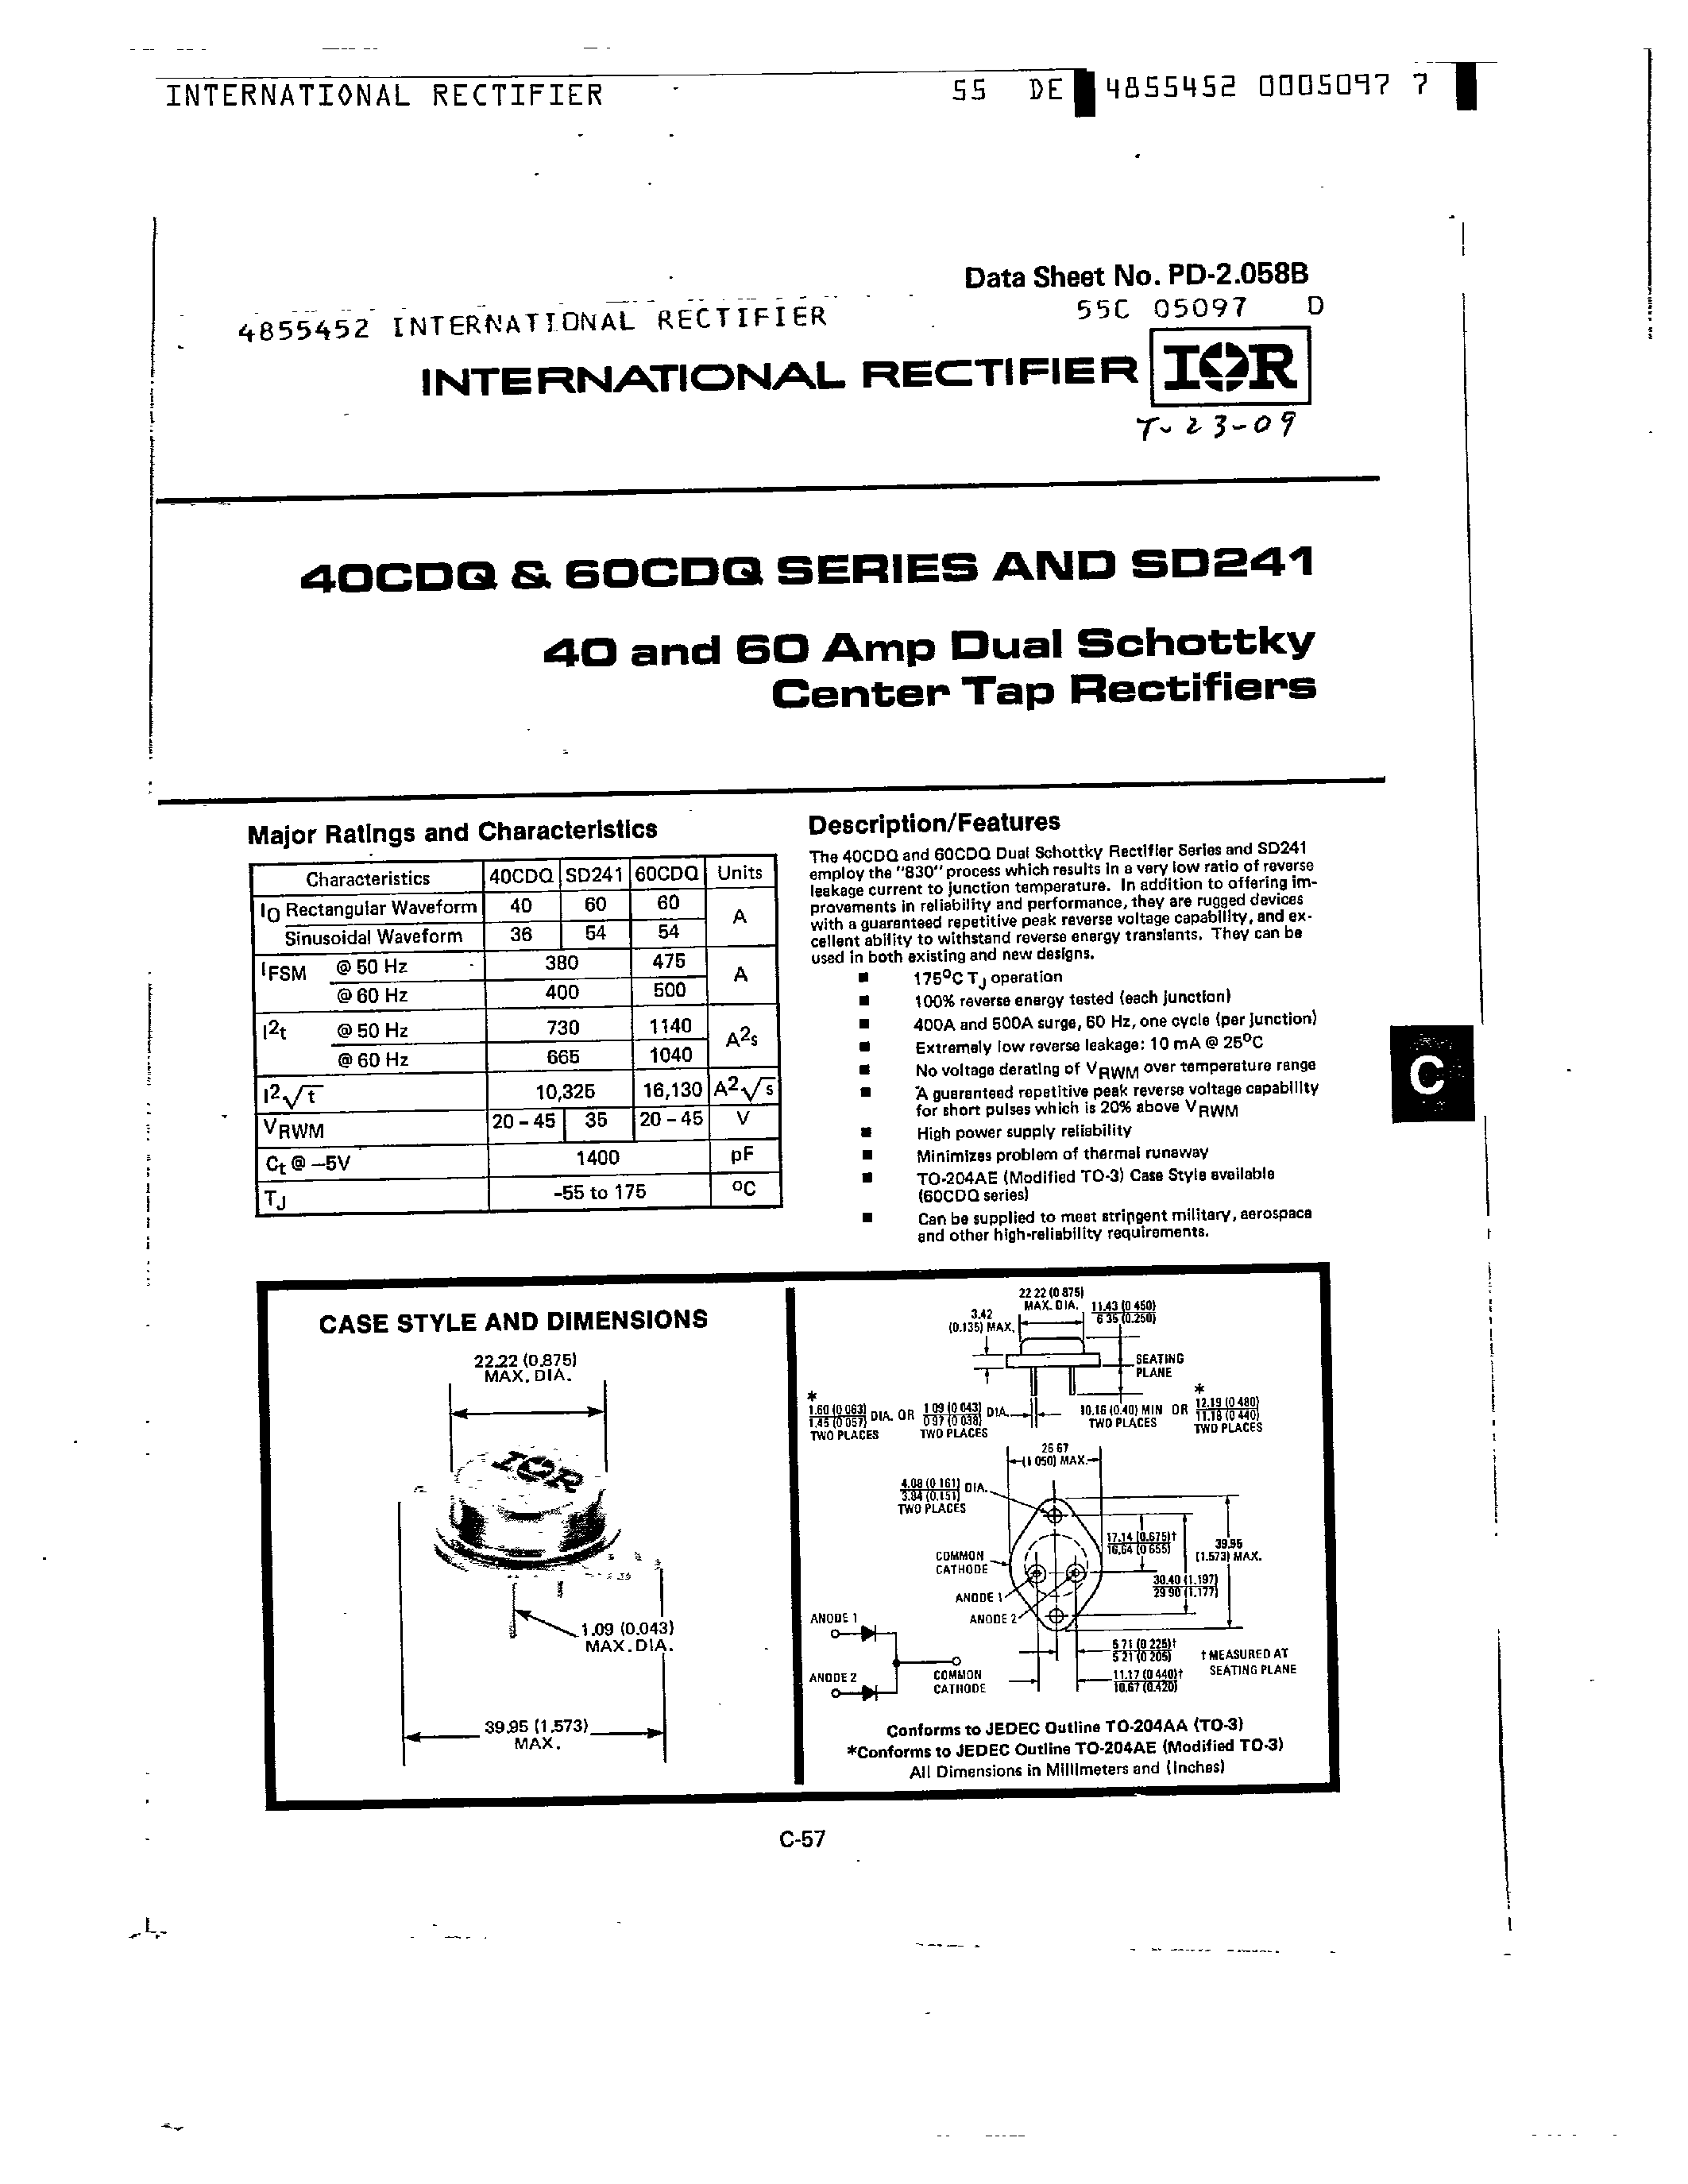 Datasheet SD241 - 40 AND 60 AMP DUAL SCHOTTKY CENTER TAP RECTIFIERS page 1